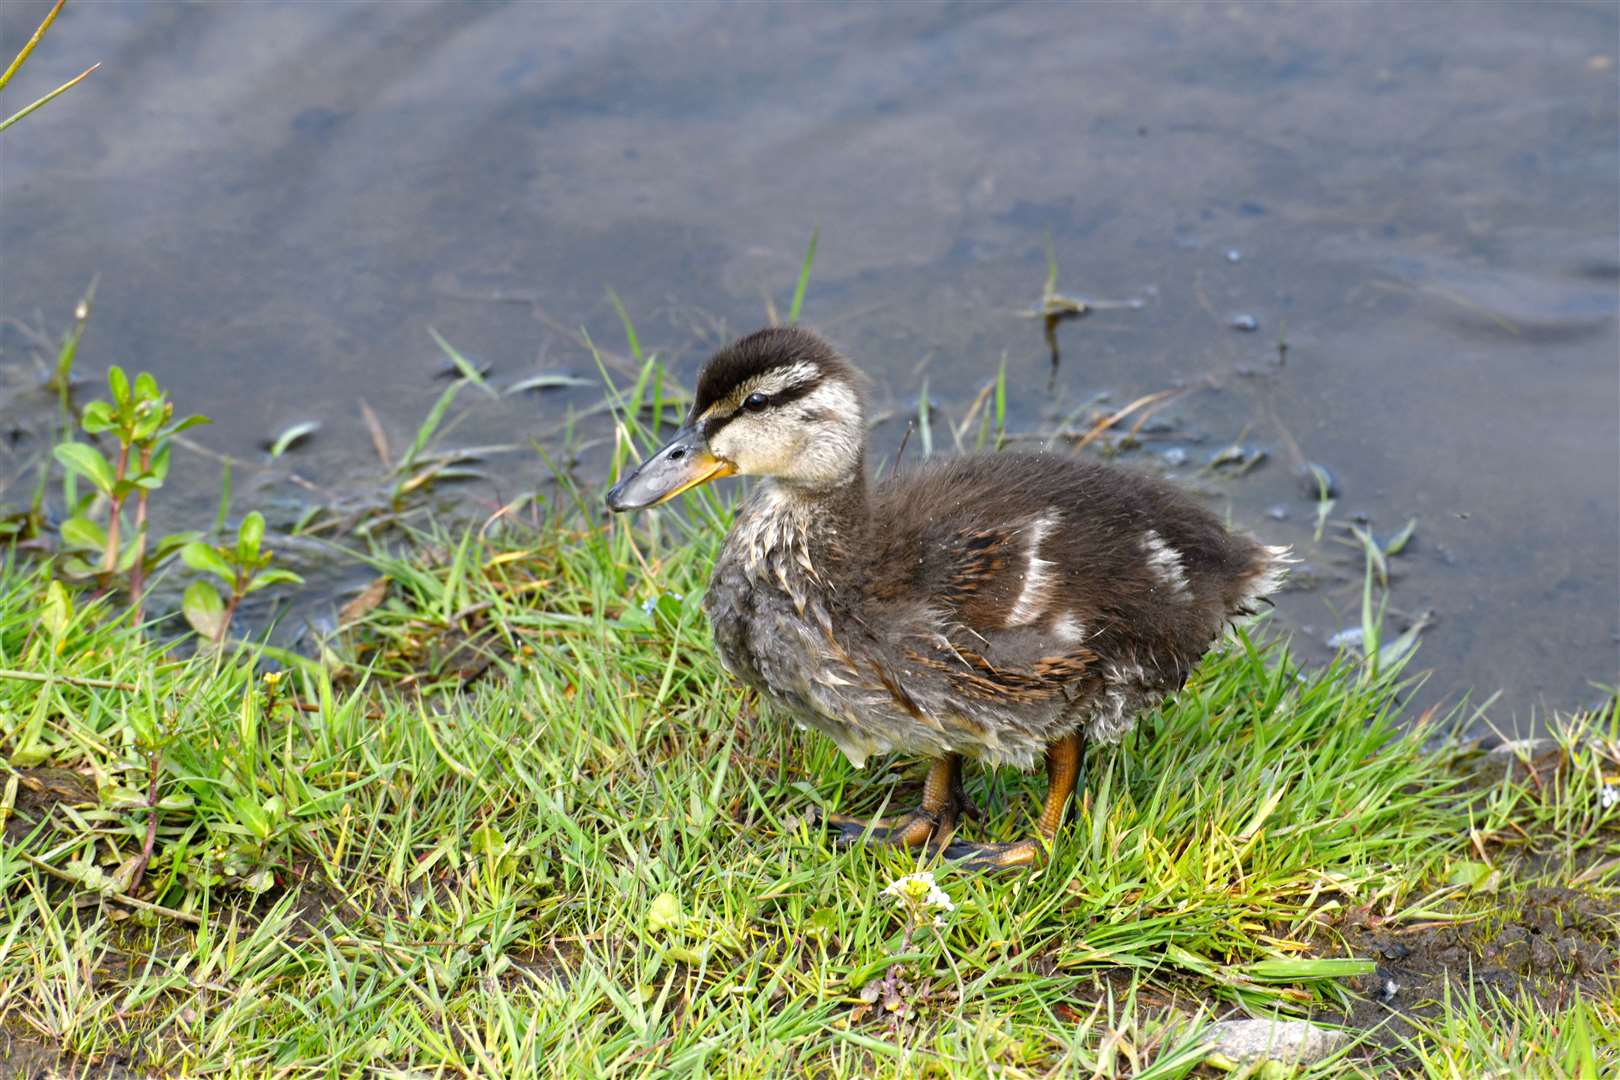 Nature Restoration Fund Eco Initiative at Culloden Park: One of the ducklings on the pond. Picture: James Mackenzie.